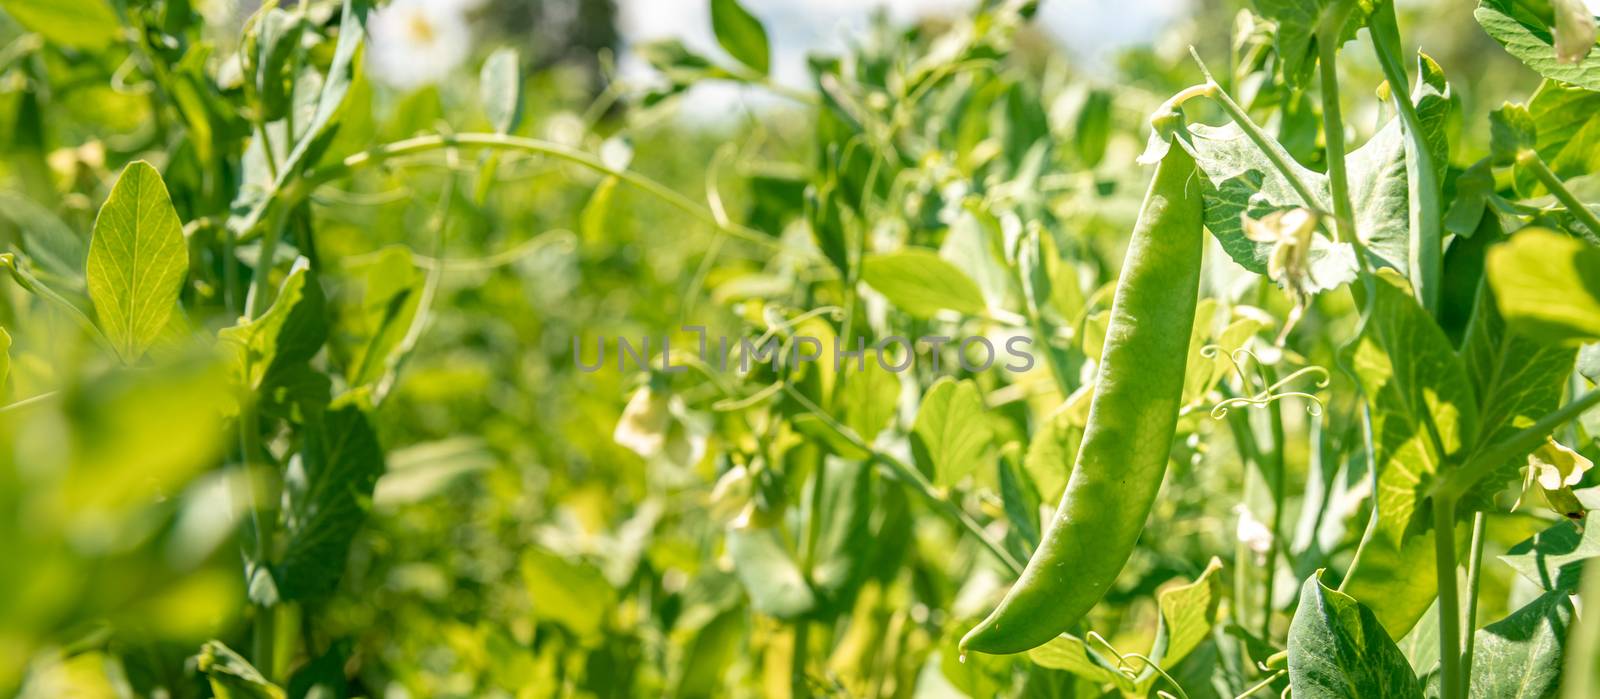 growing green sugar peas in organic quality without pesticide on the farm.